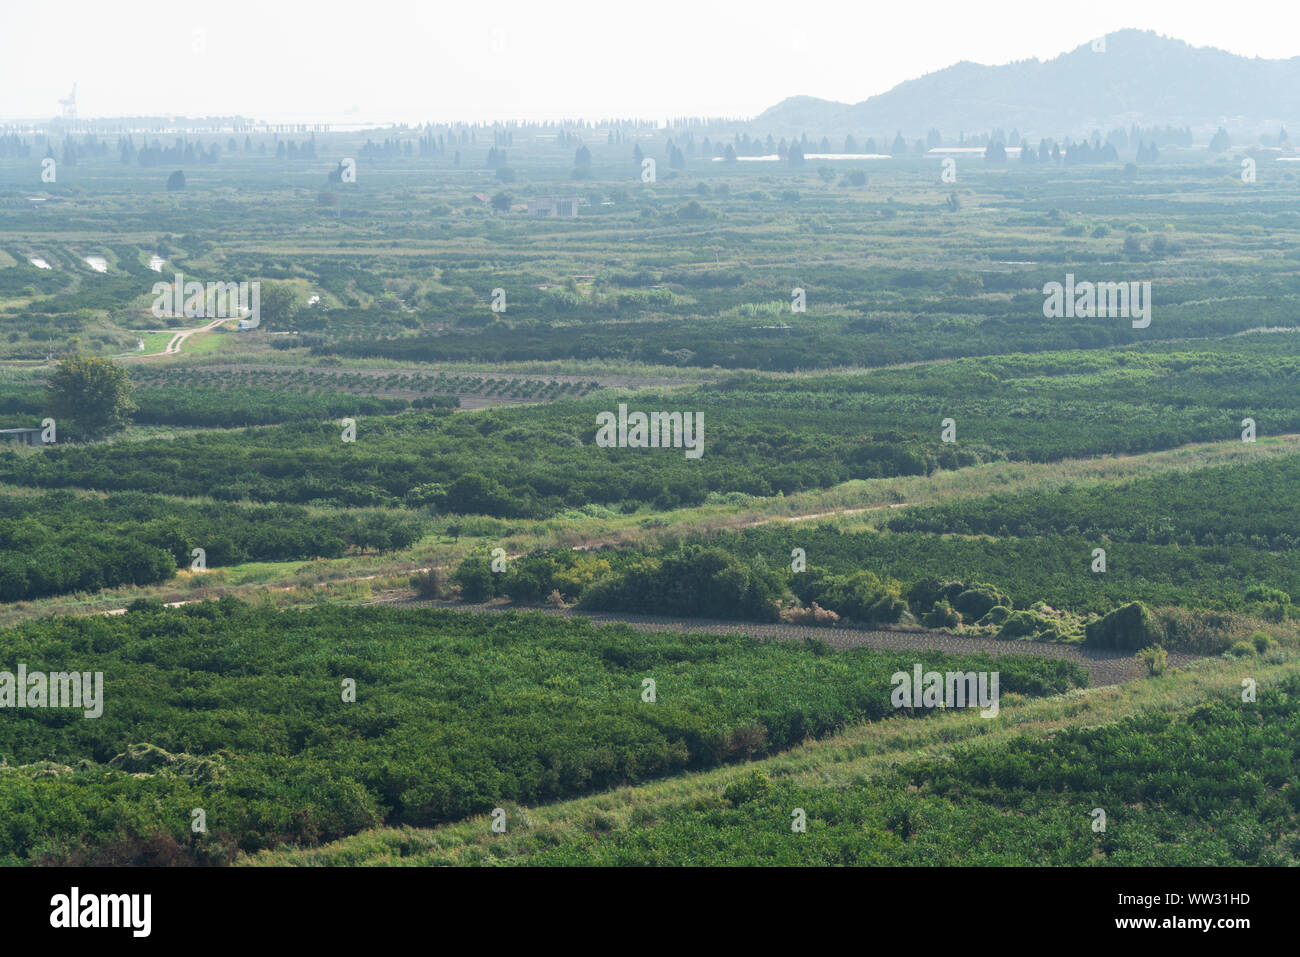 Top view of agricultural land. Valley of fields and fruit farms with irrigation system Stock Photo